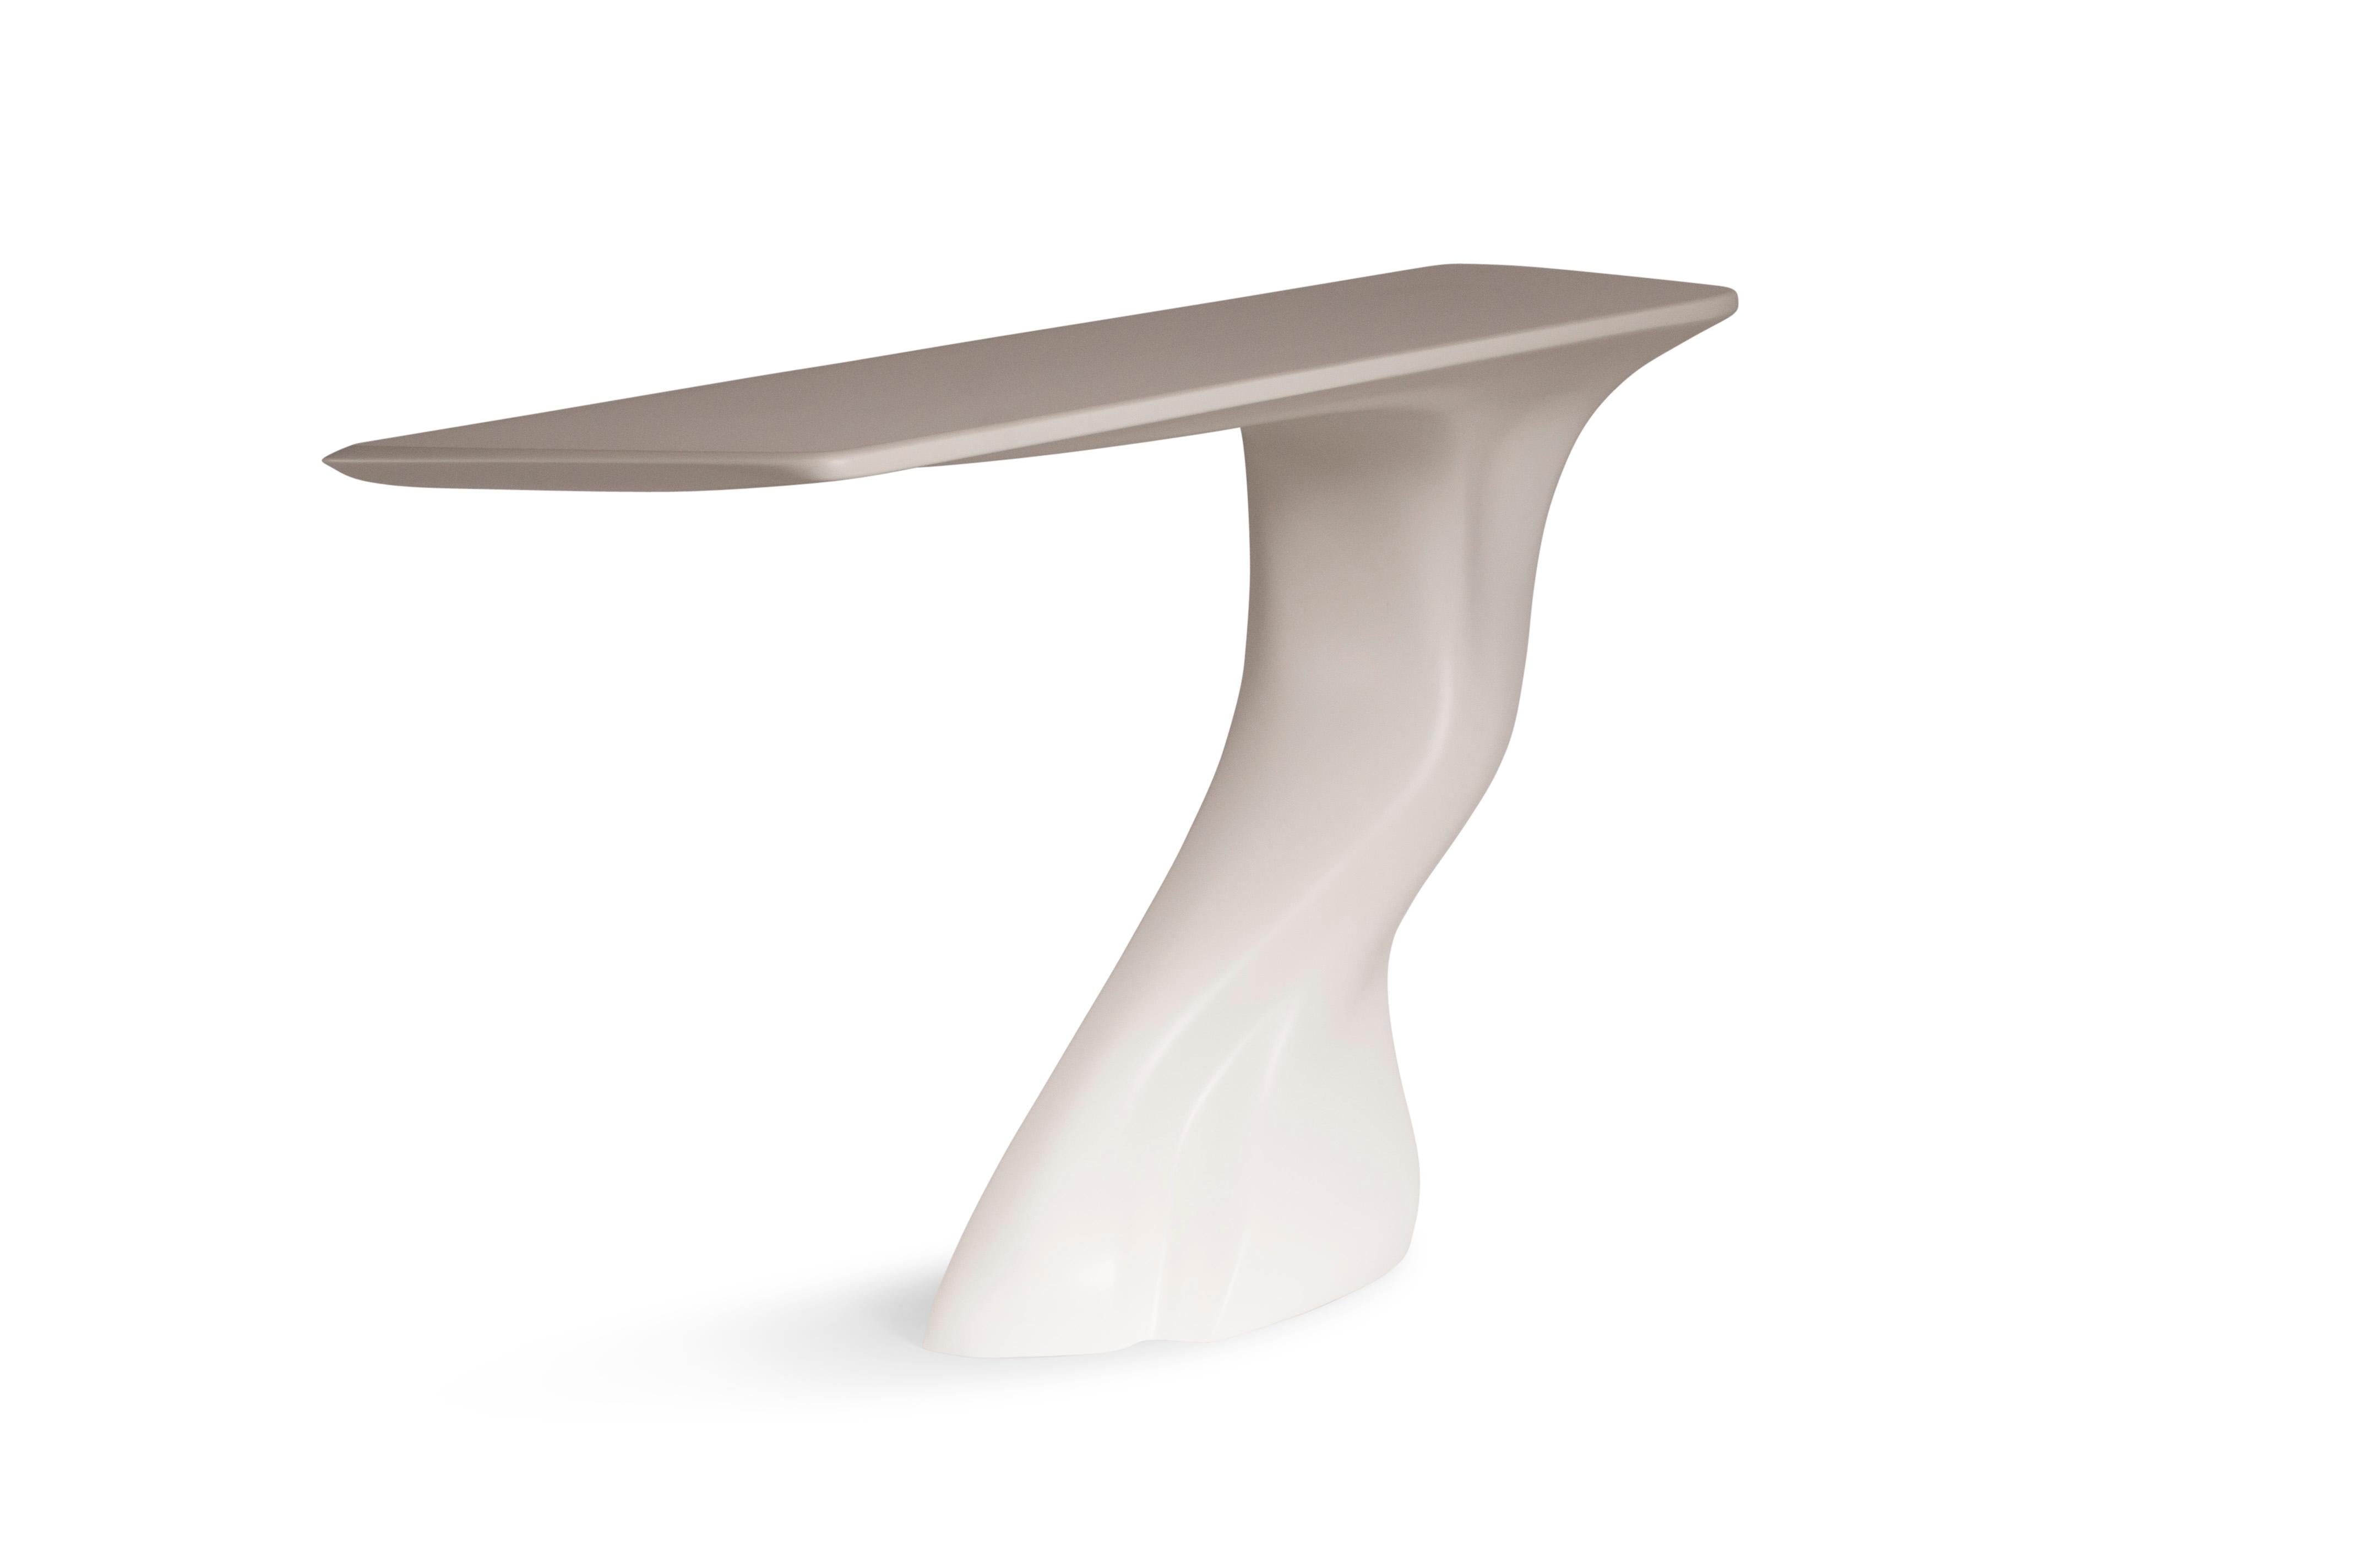 Frolic console table is a stylish futuristic sculptural art table with a dynamic form designed and manufactured by Amorph. Frolic console table is made out of wood with white matte lacquer finish. By the nature, the ashwood grain’s look would be